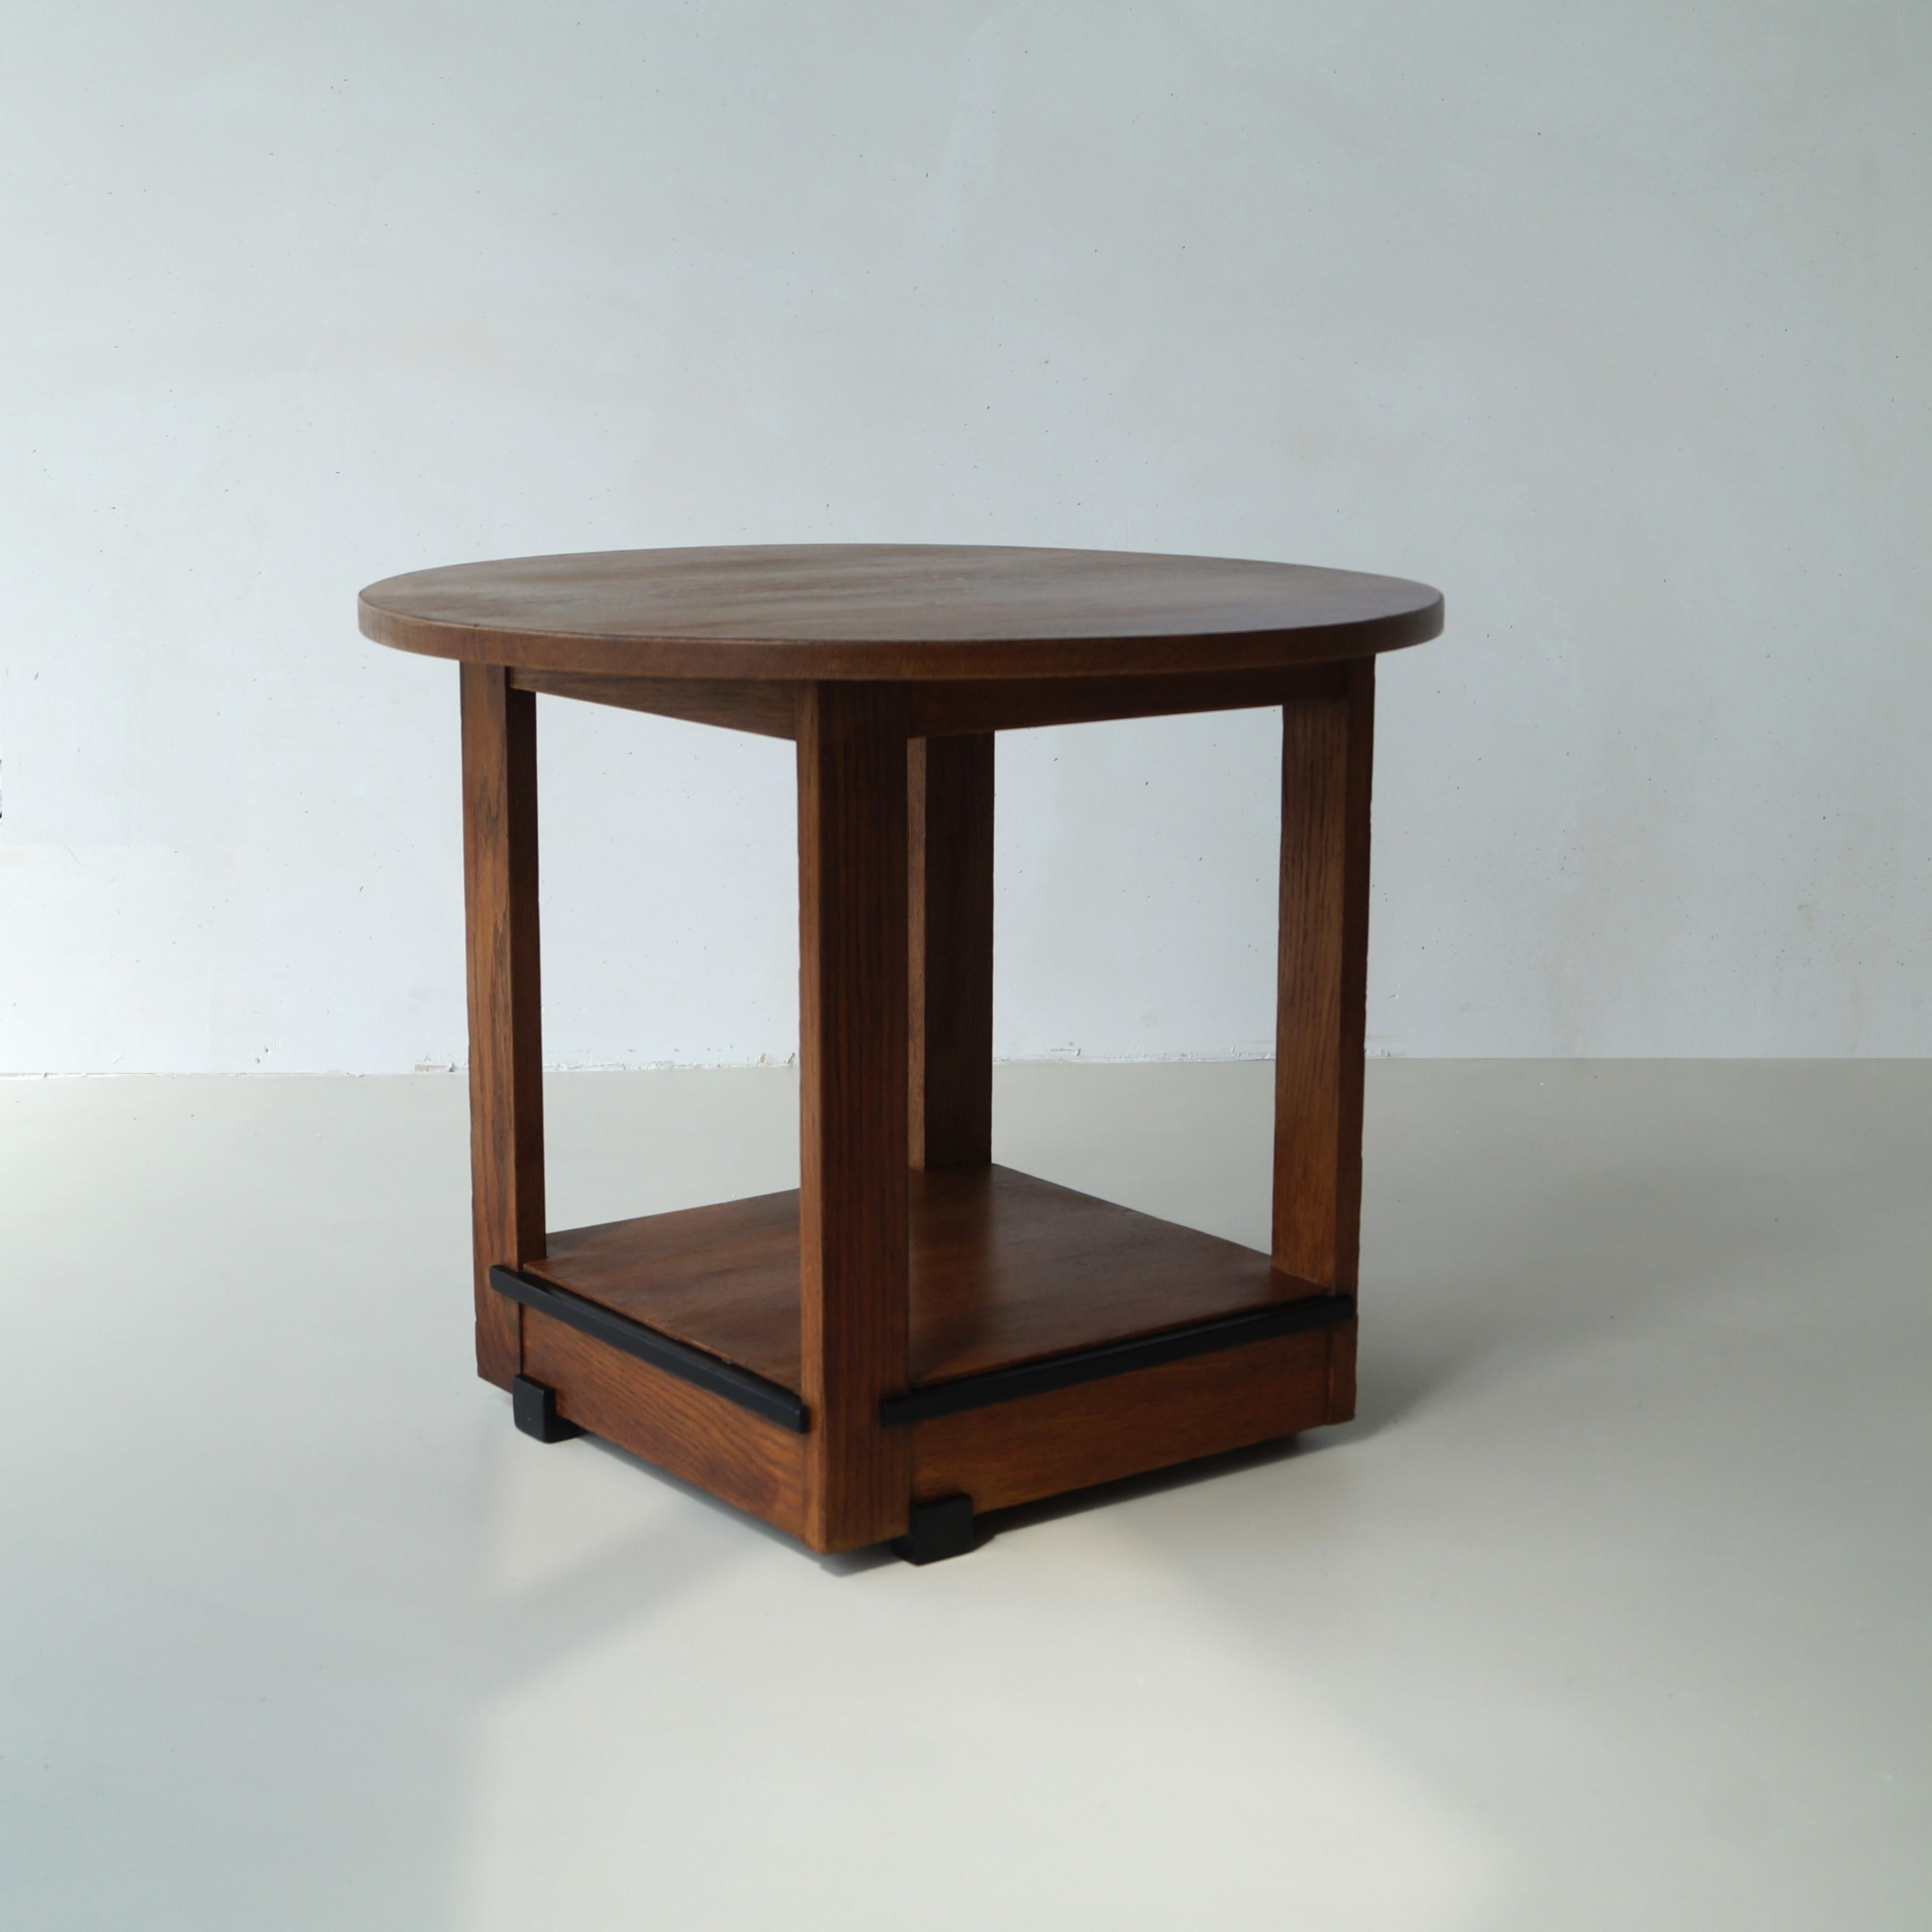 Amsterdam School Modernist Dutch Art Deco occasional table attributed to Jan Brunott, 1920s For Sale